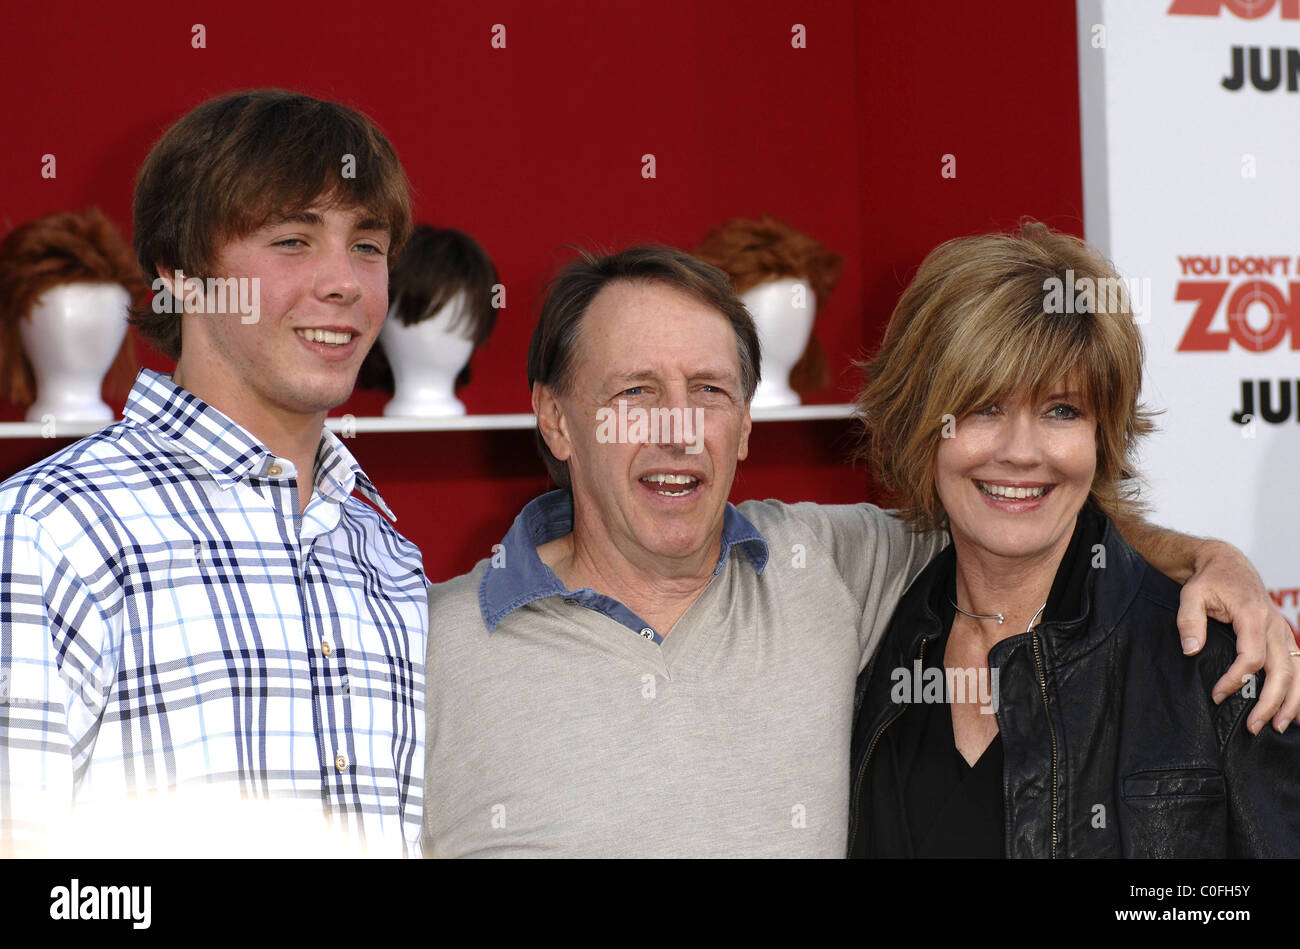 Director Dennis Dugan and family World premiere of 'You Don't Mess with Zohan' at Grauman's Chinese Theater Los Angeles, Stock Photo